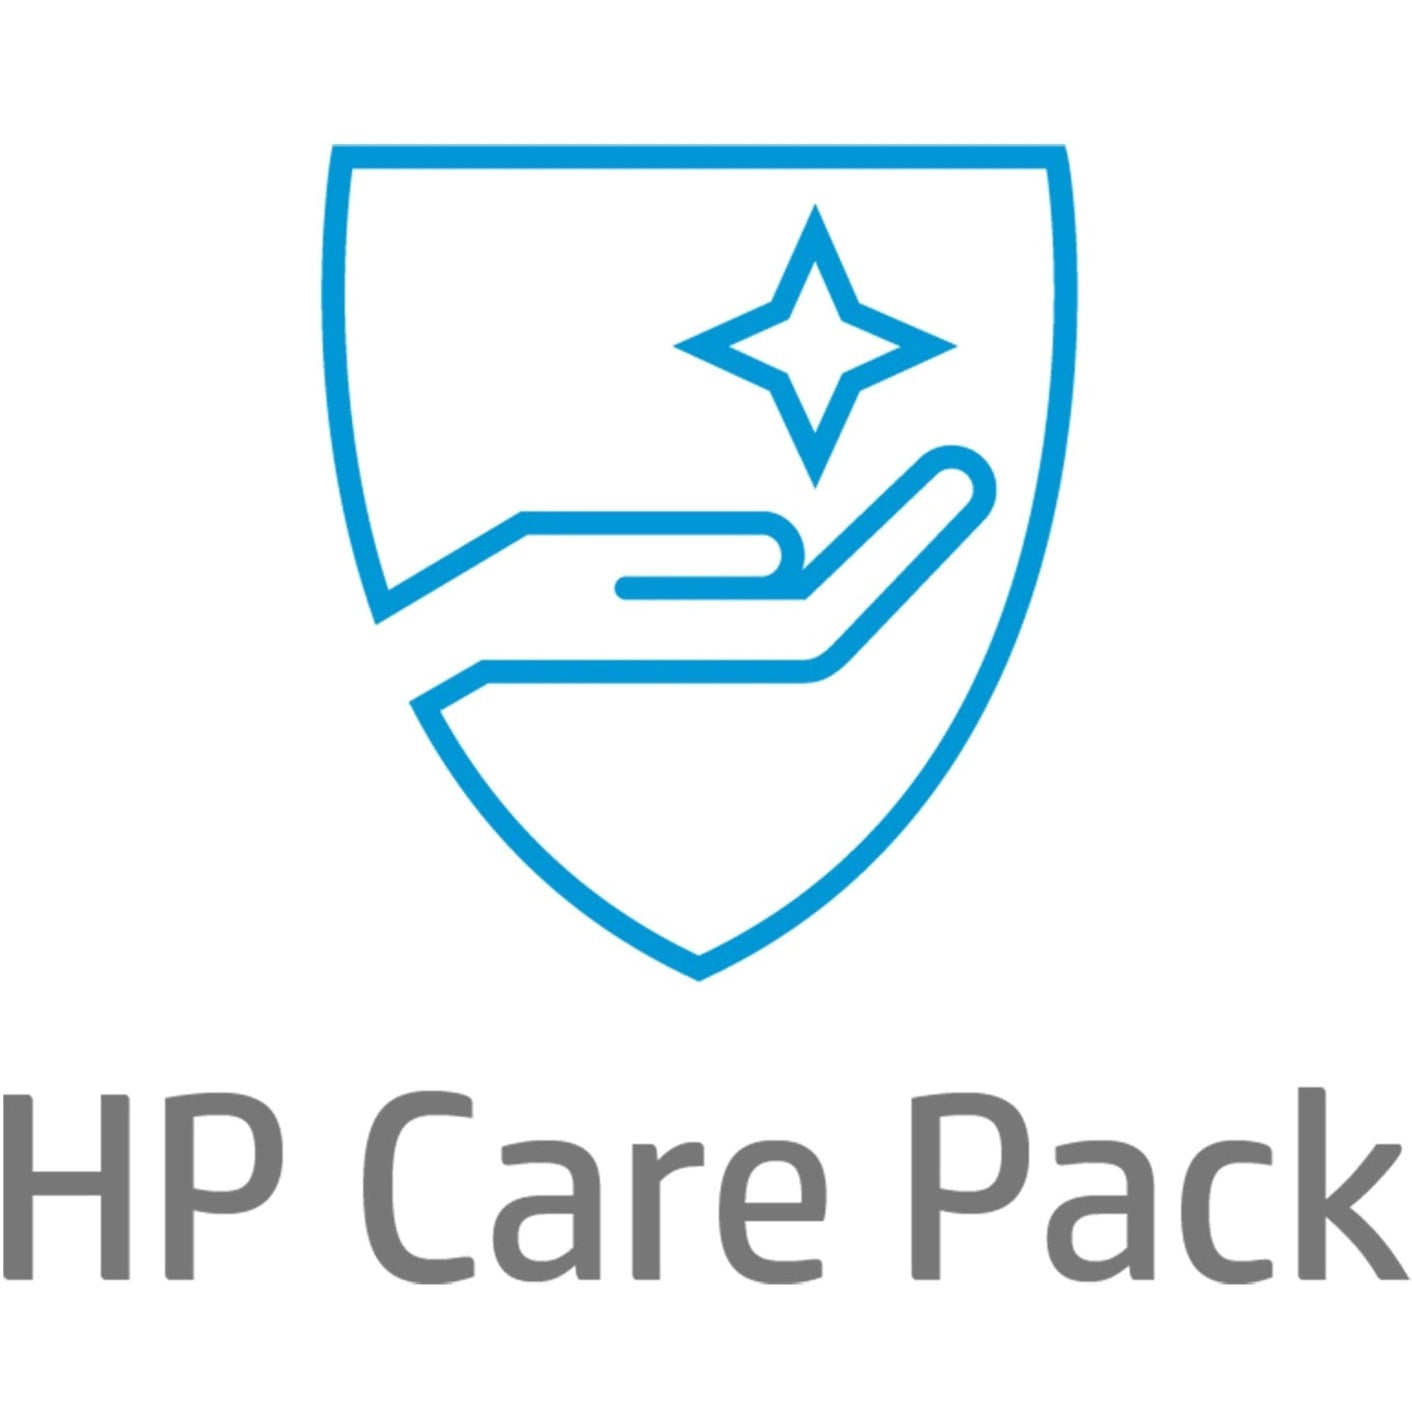 HP Care Pack Hardware Support with Disk Retention - Extended Service - 5 Year - Service (UA7A5E)